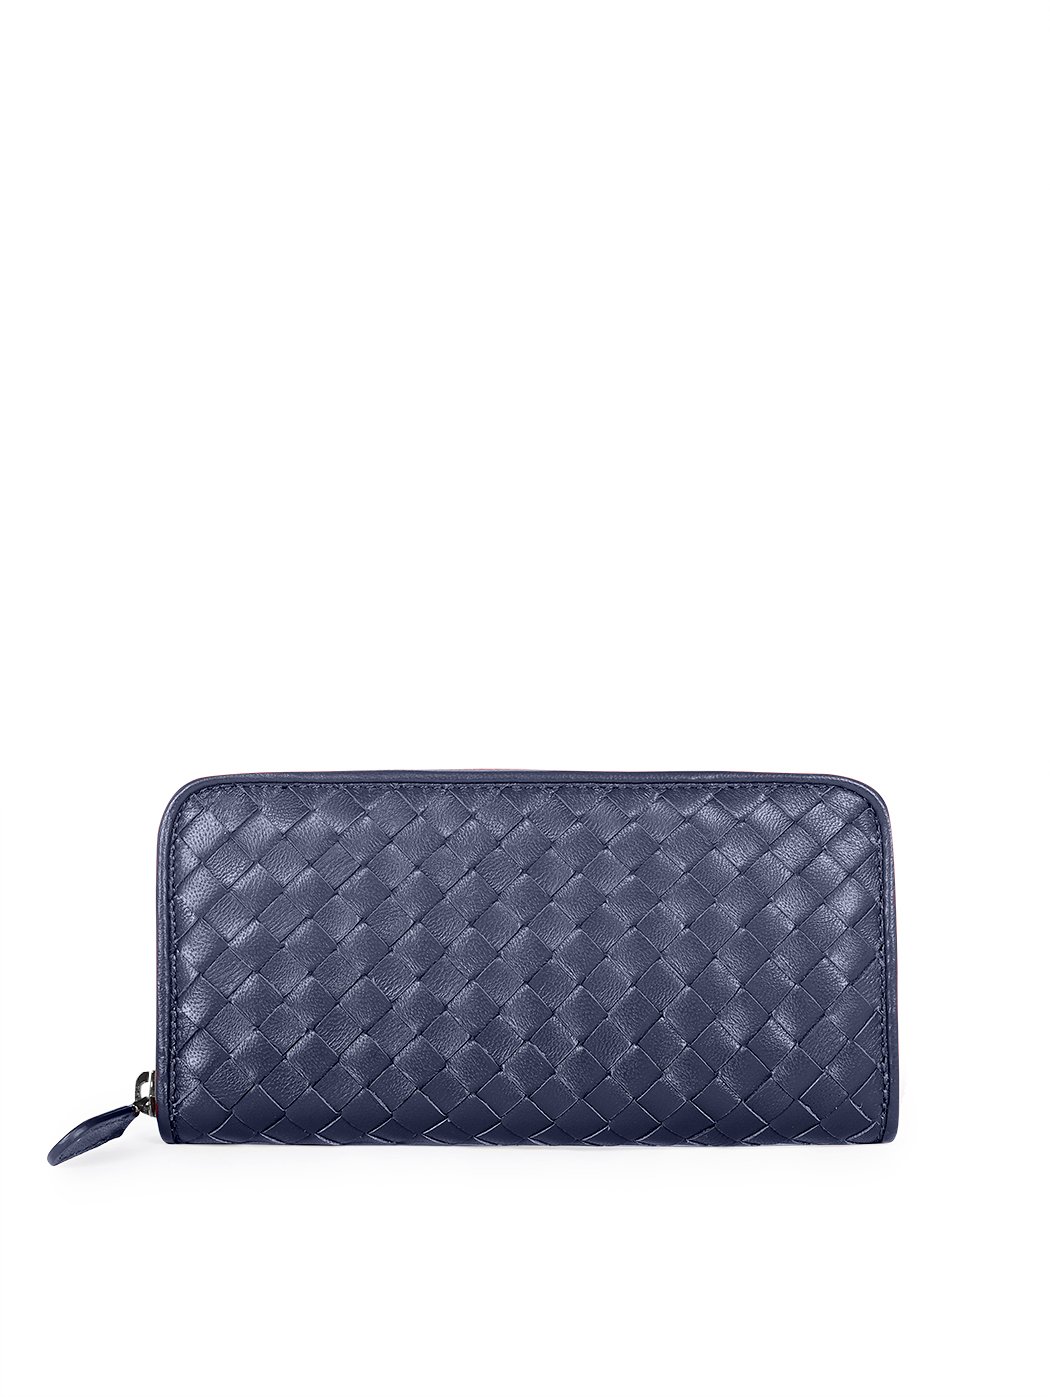 Long zip-around wallet in blue woven leather